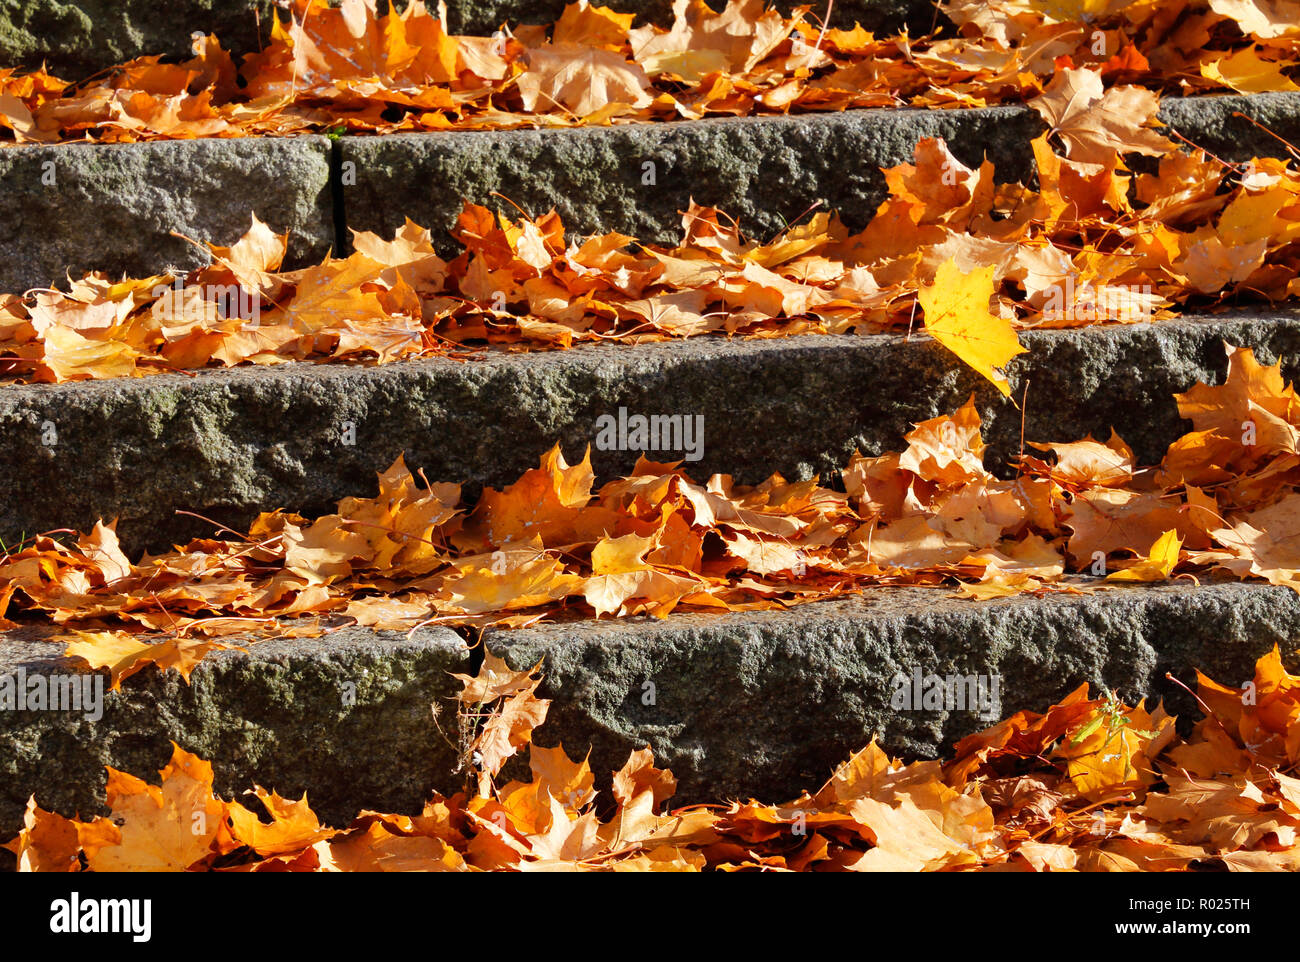 Full frame image with fallen autumn maple leaves outdoor in a staircase. Stock Photo